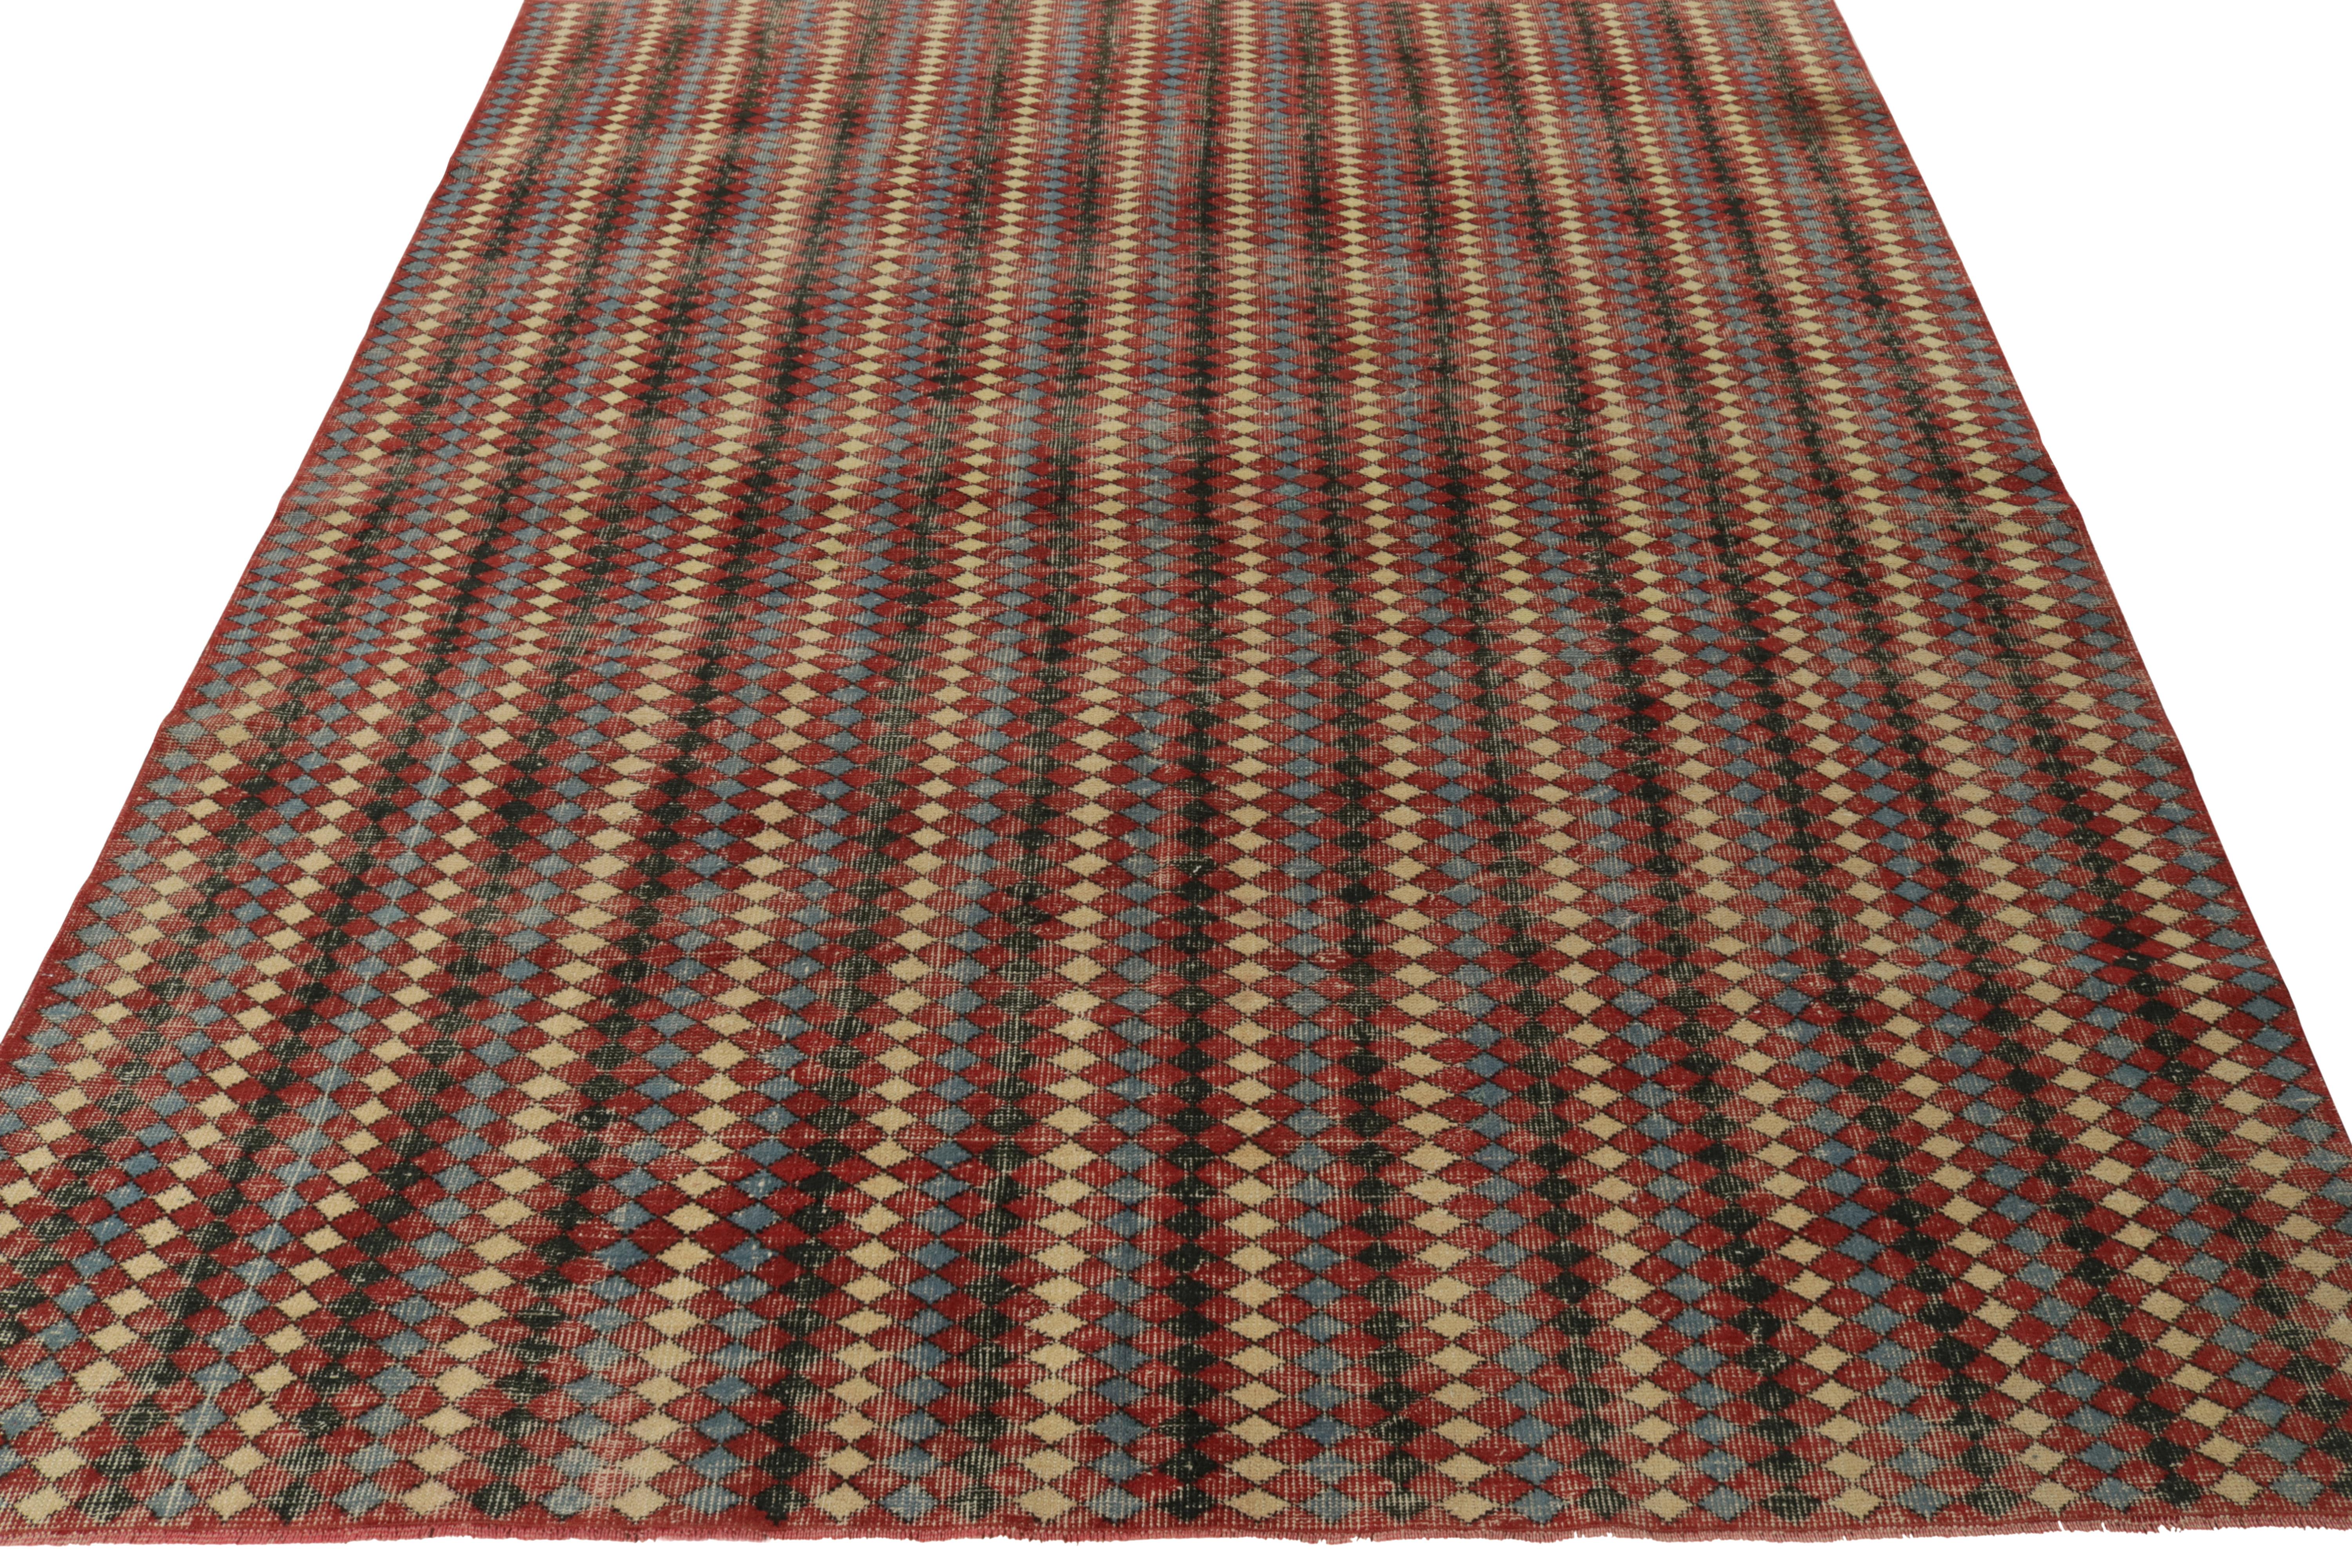 Hand-knotted in wool, a 7x9 distressed style vintage rug from the celebrated artist Zeki Muren - one of his latest pieces to join Rug & Kilim’s Mid-Century Pasha collection. The rustic drawing derives a shabby chic vibe with the employment of rich